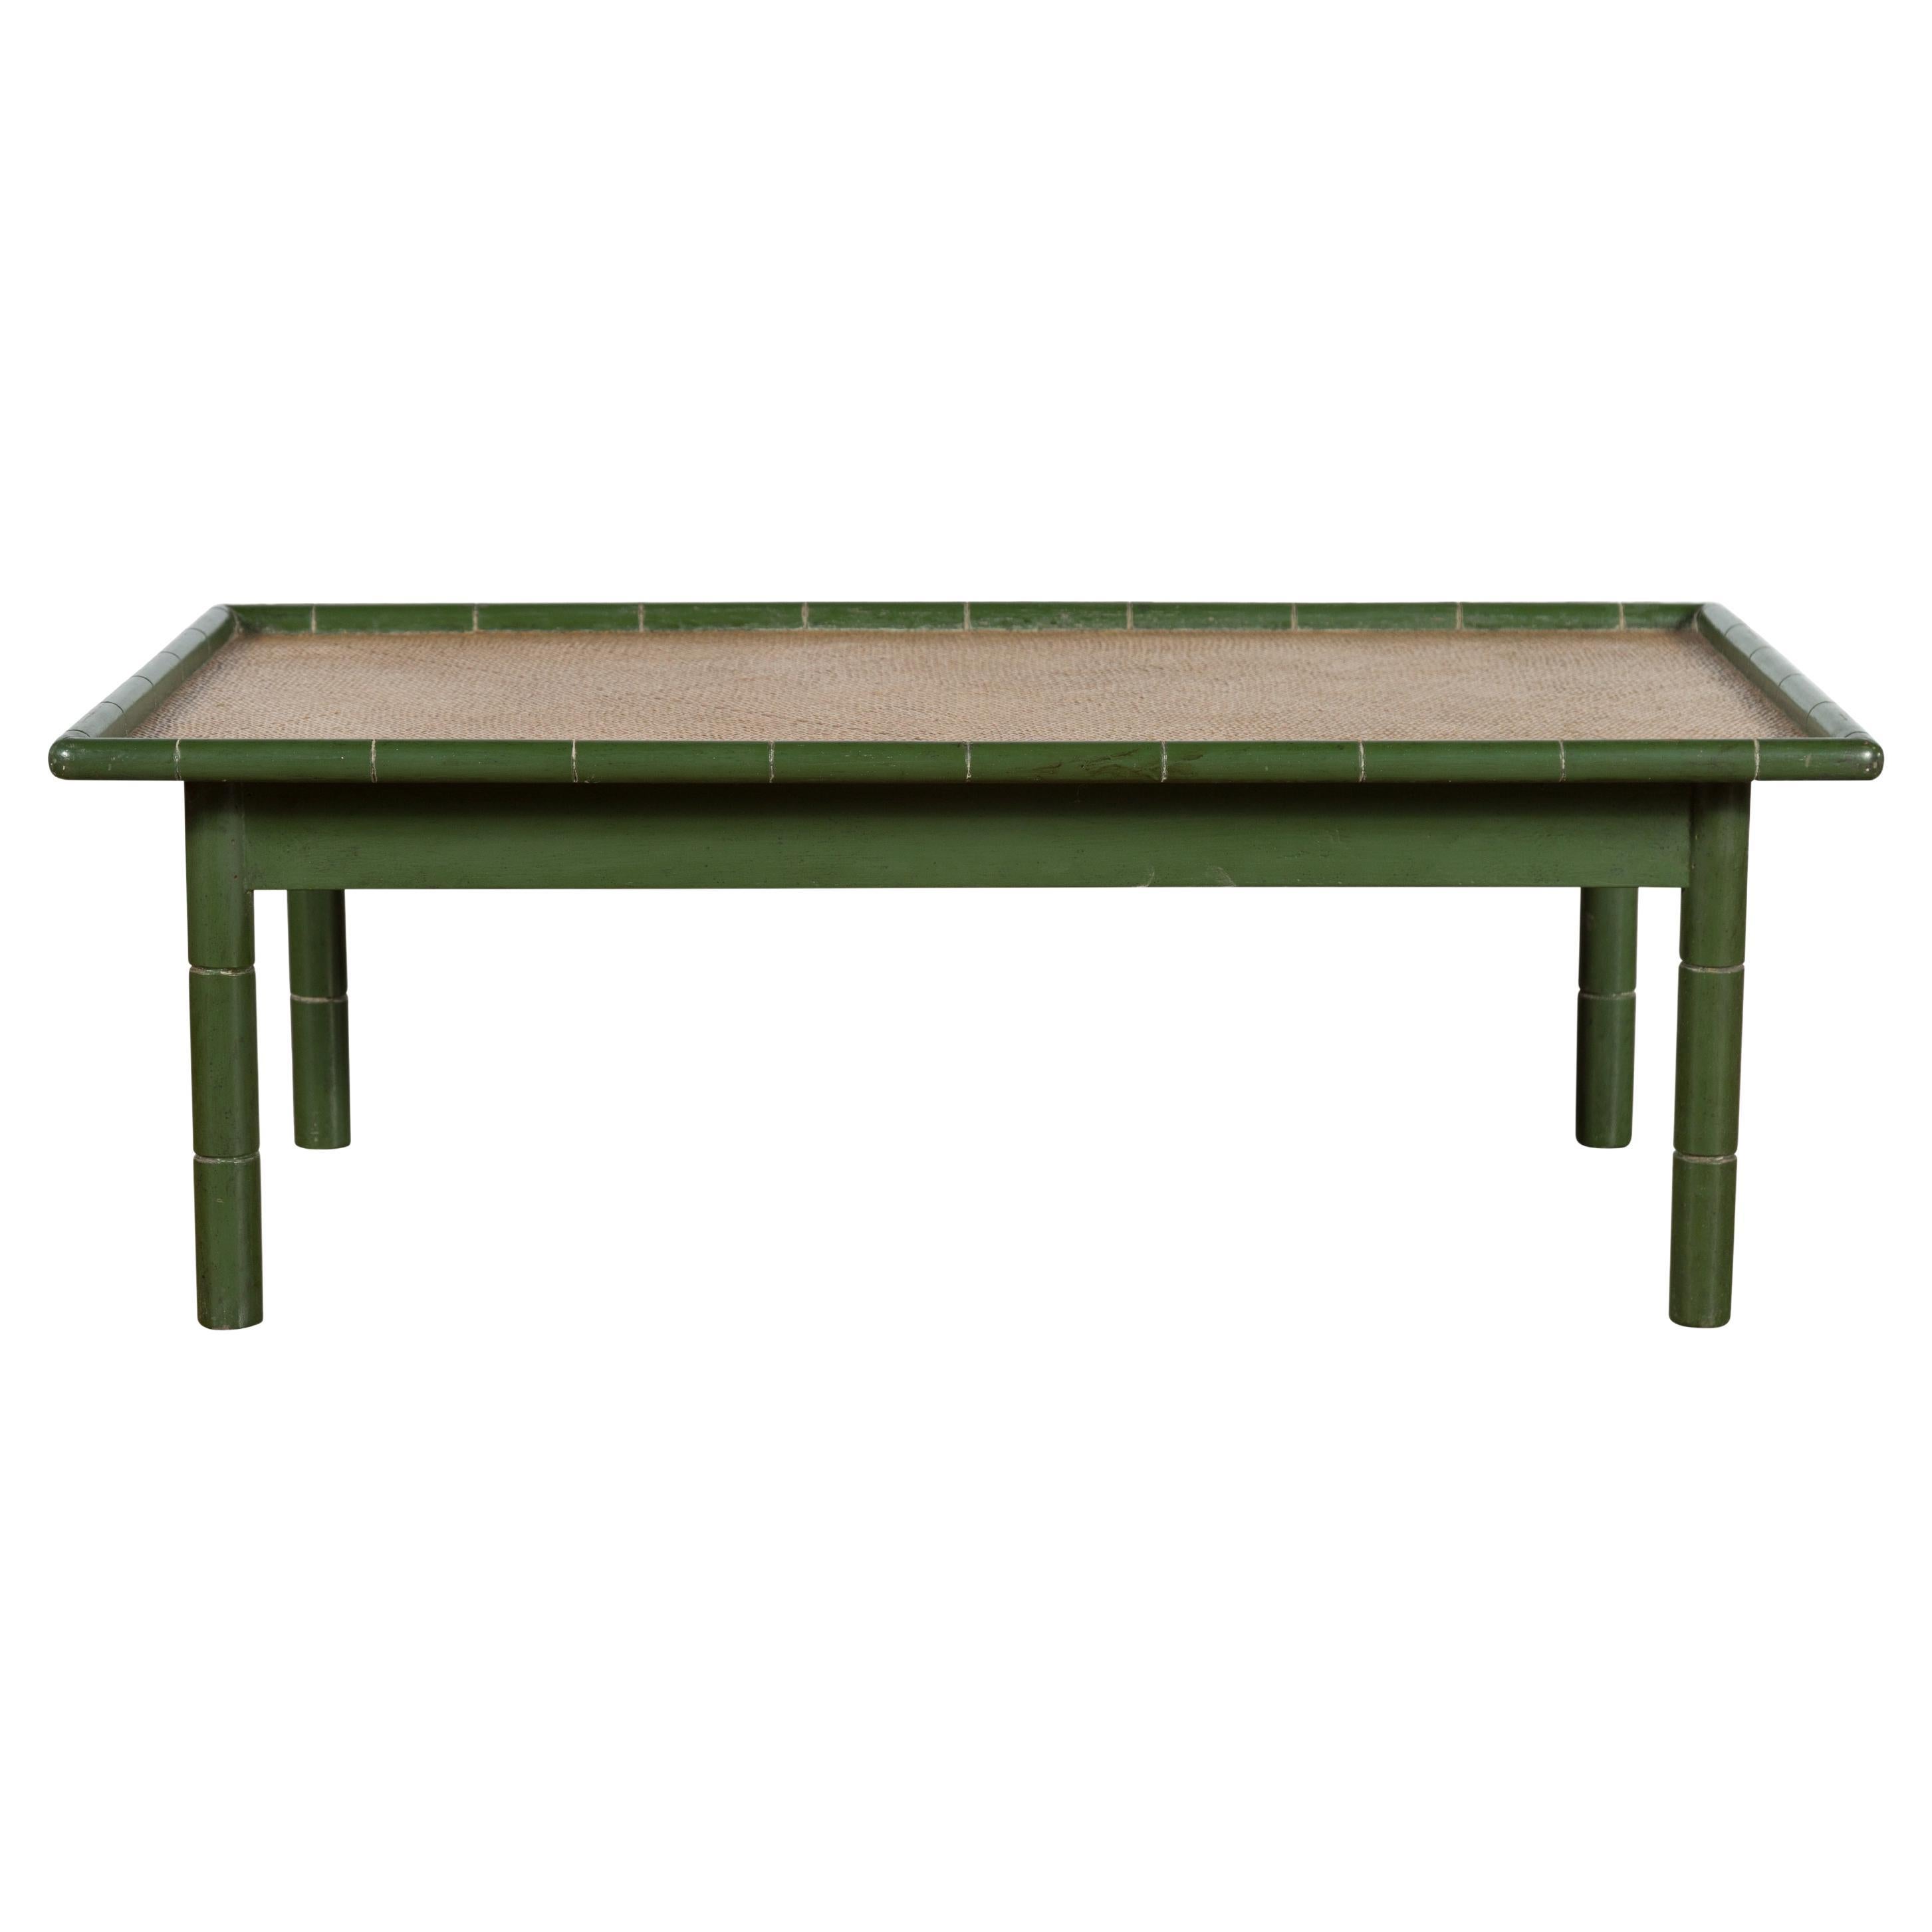 Vintage Thai Green Painted Faux Bamboo Coffee Table with Woven Rattan Top